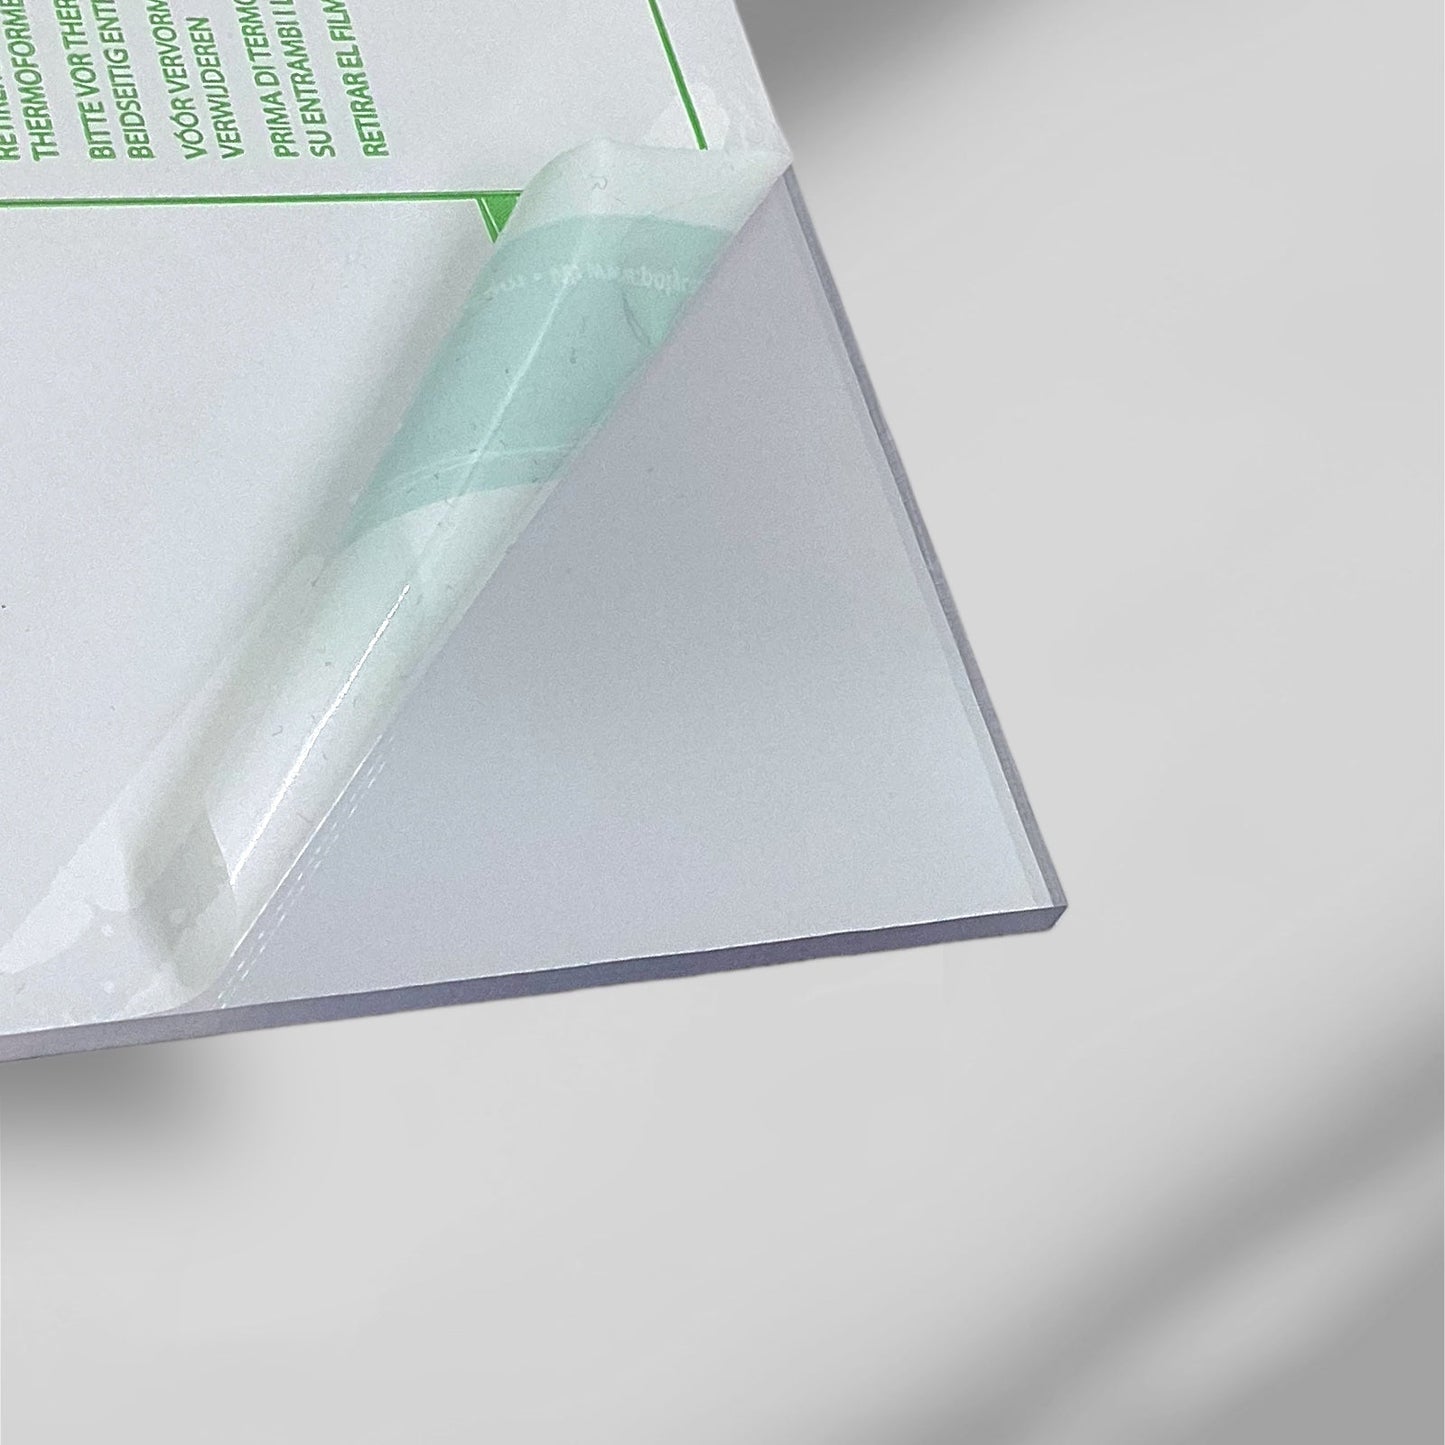 3/16" Clear Polycarbonate Sheet